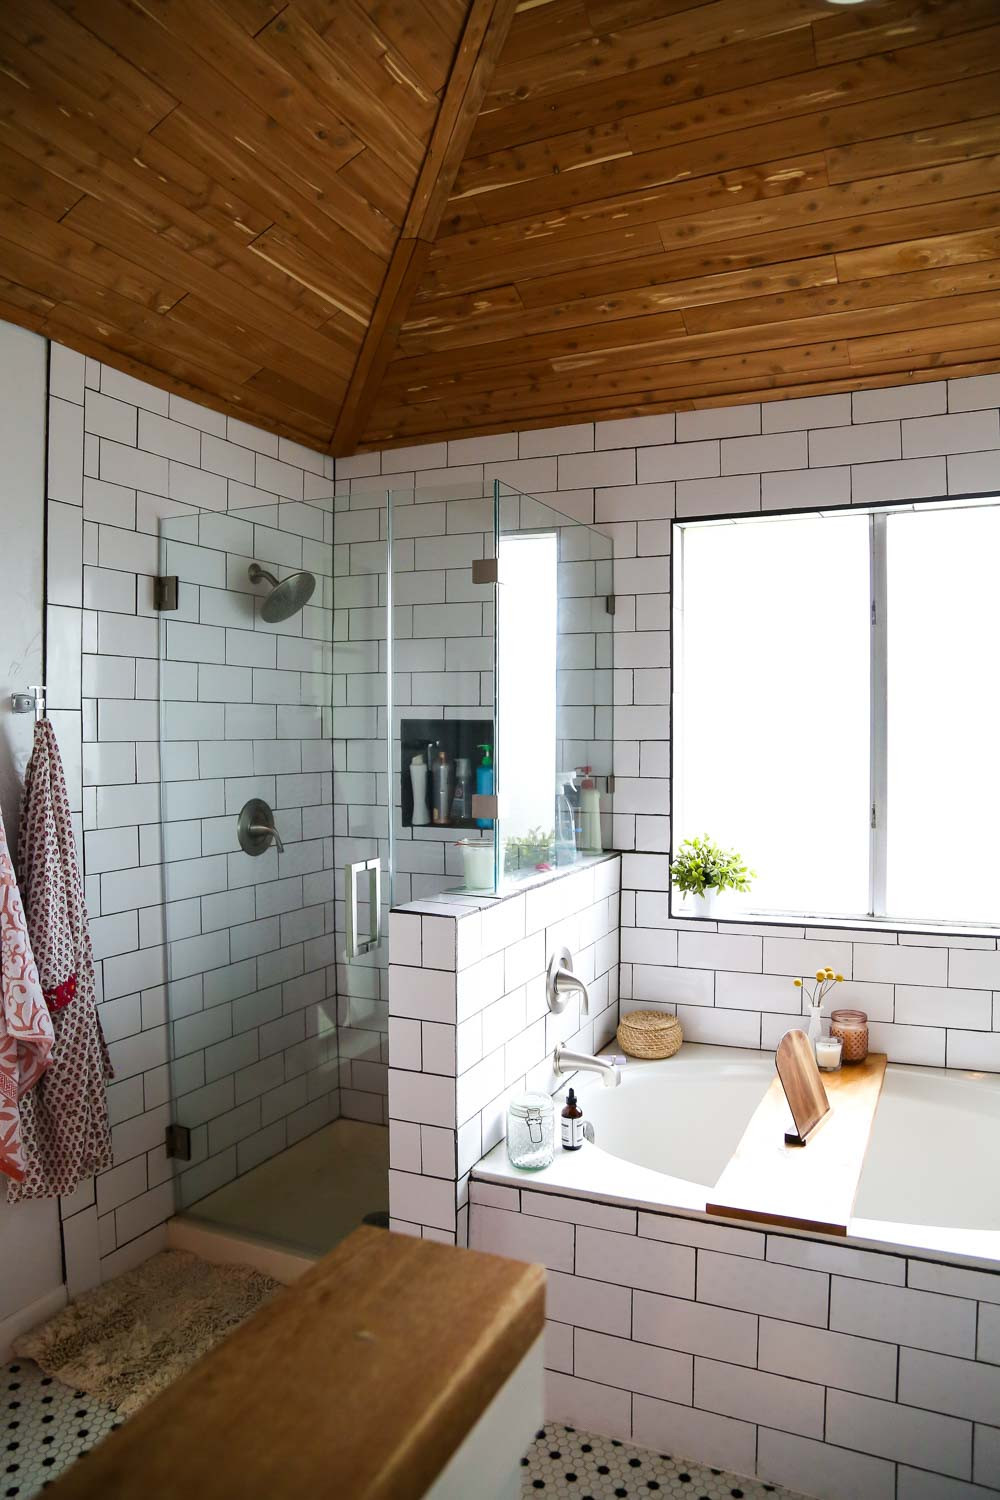 Master Bathroom Remodel
 Before & After A Master Bath Gets a Bright Makeover in